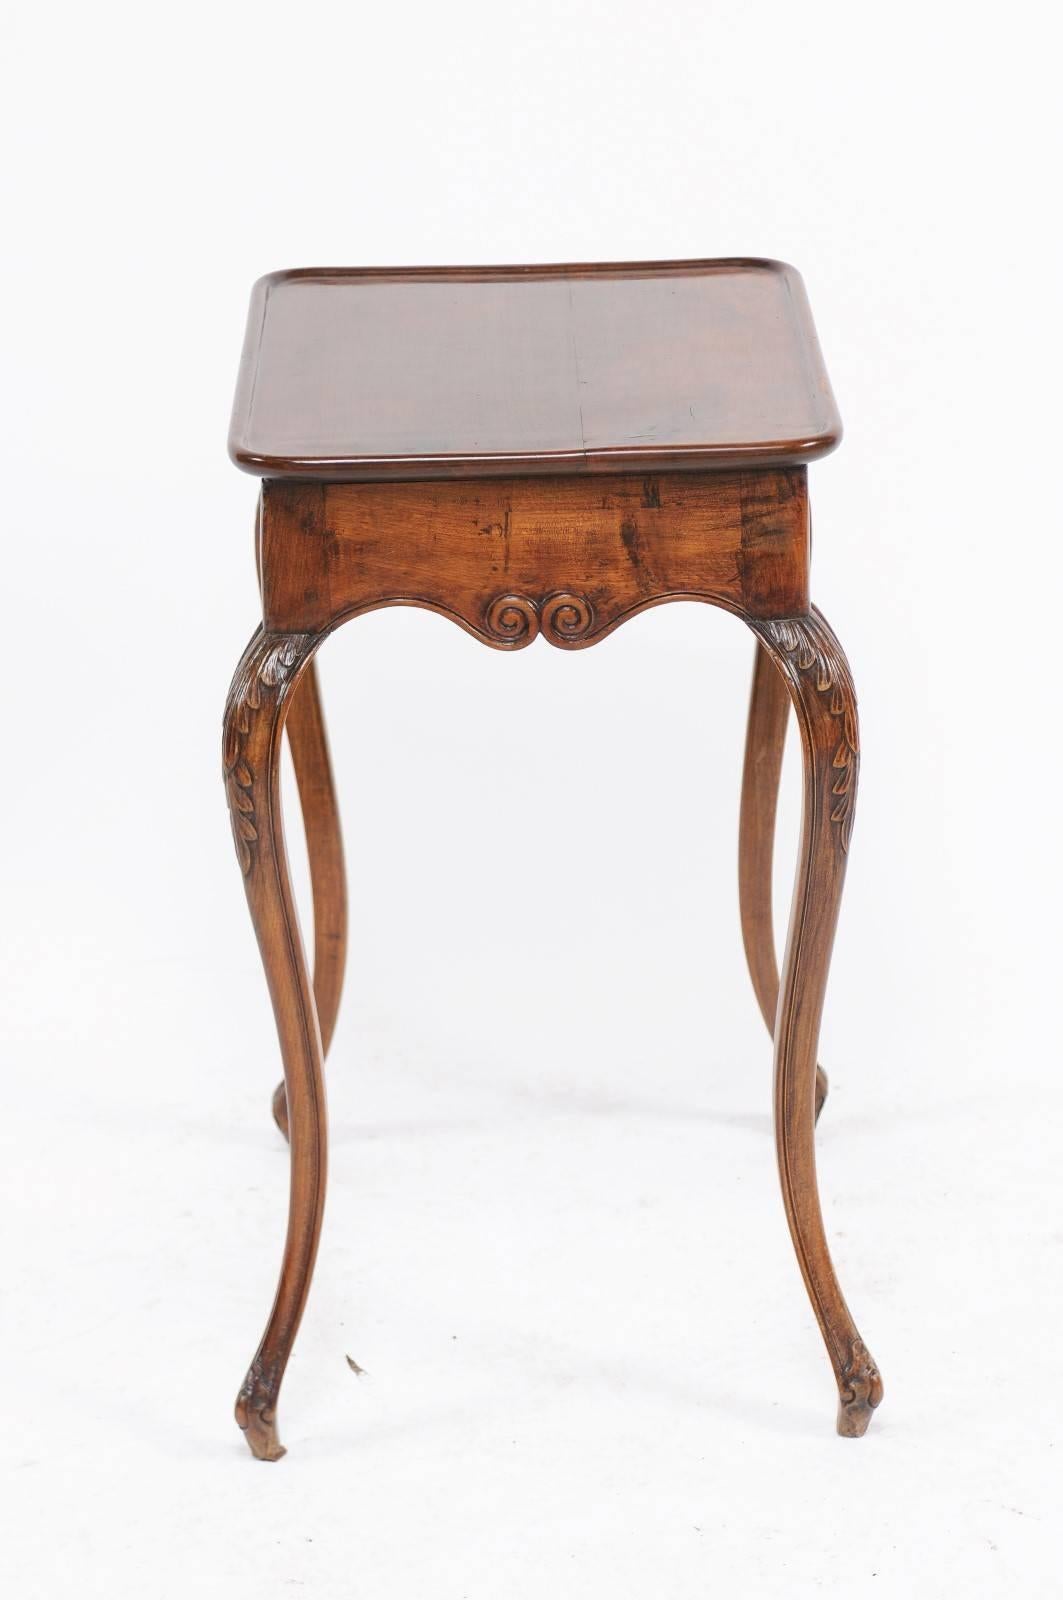 Wood French Louis XV Style Walnut Side Table with Curlicue Carving, 19th Century